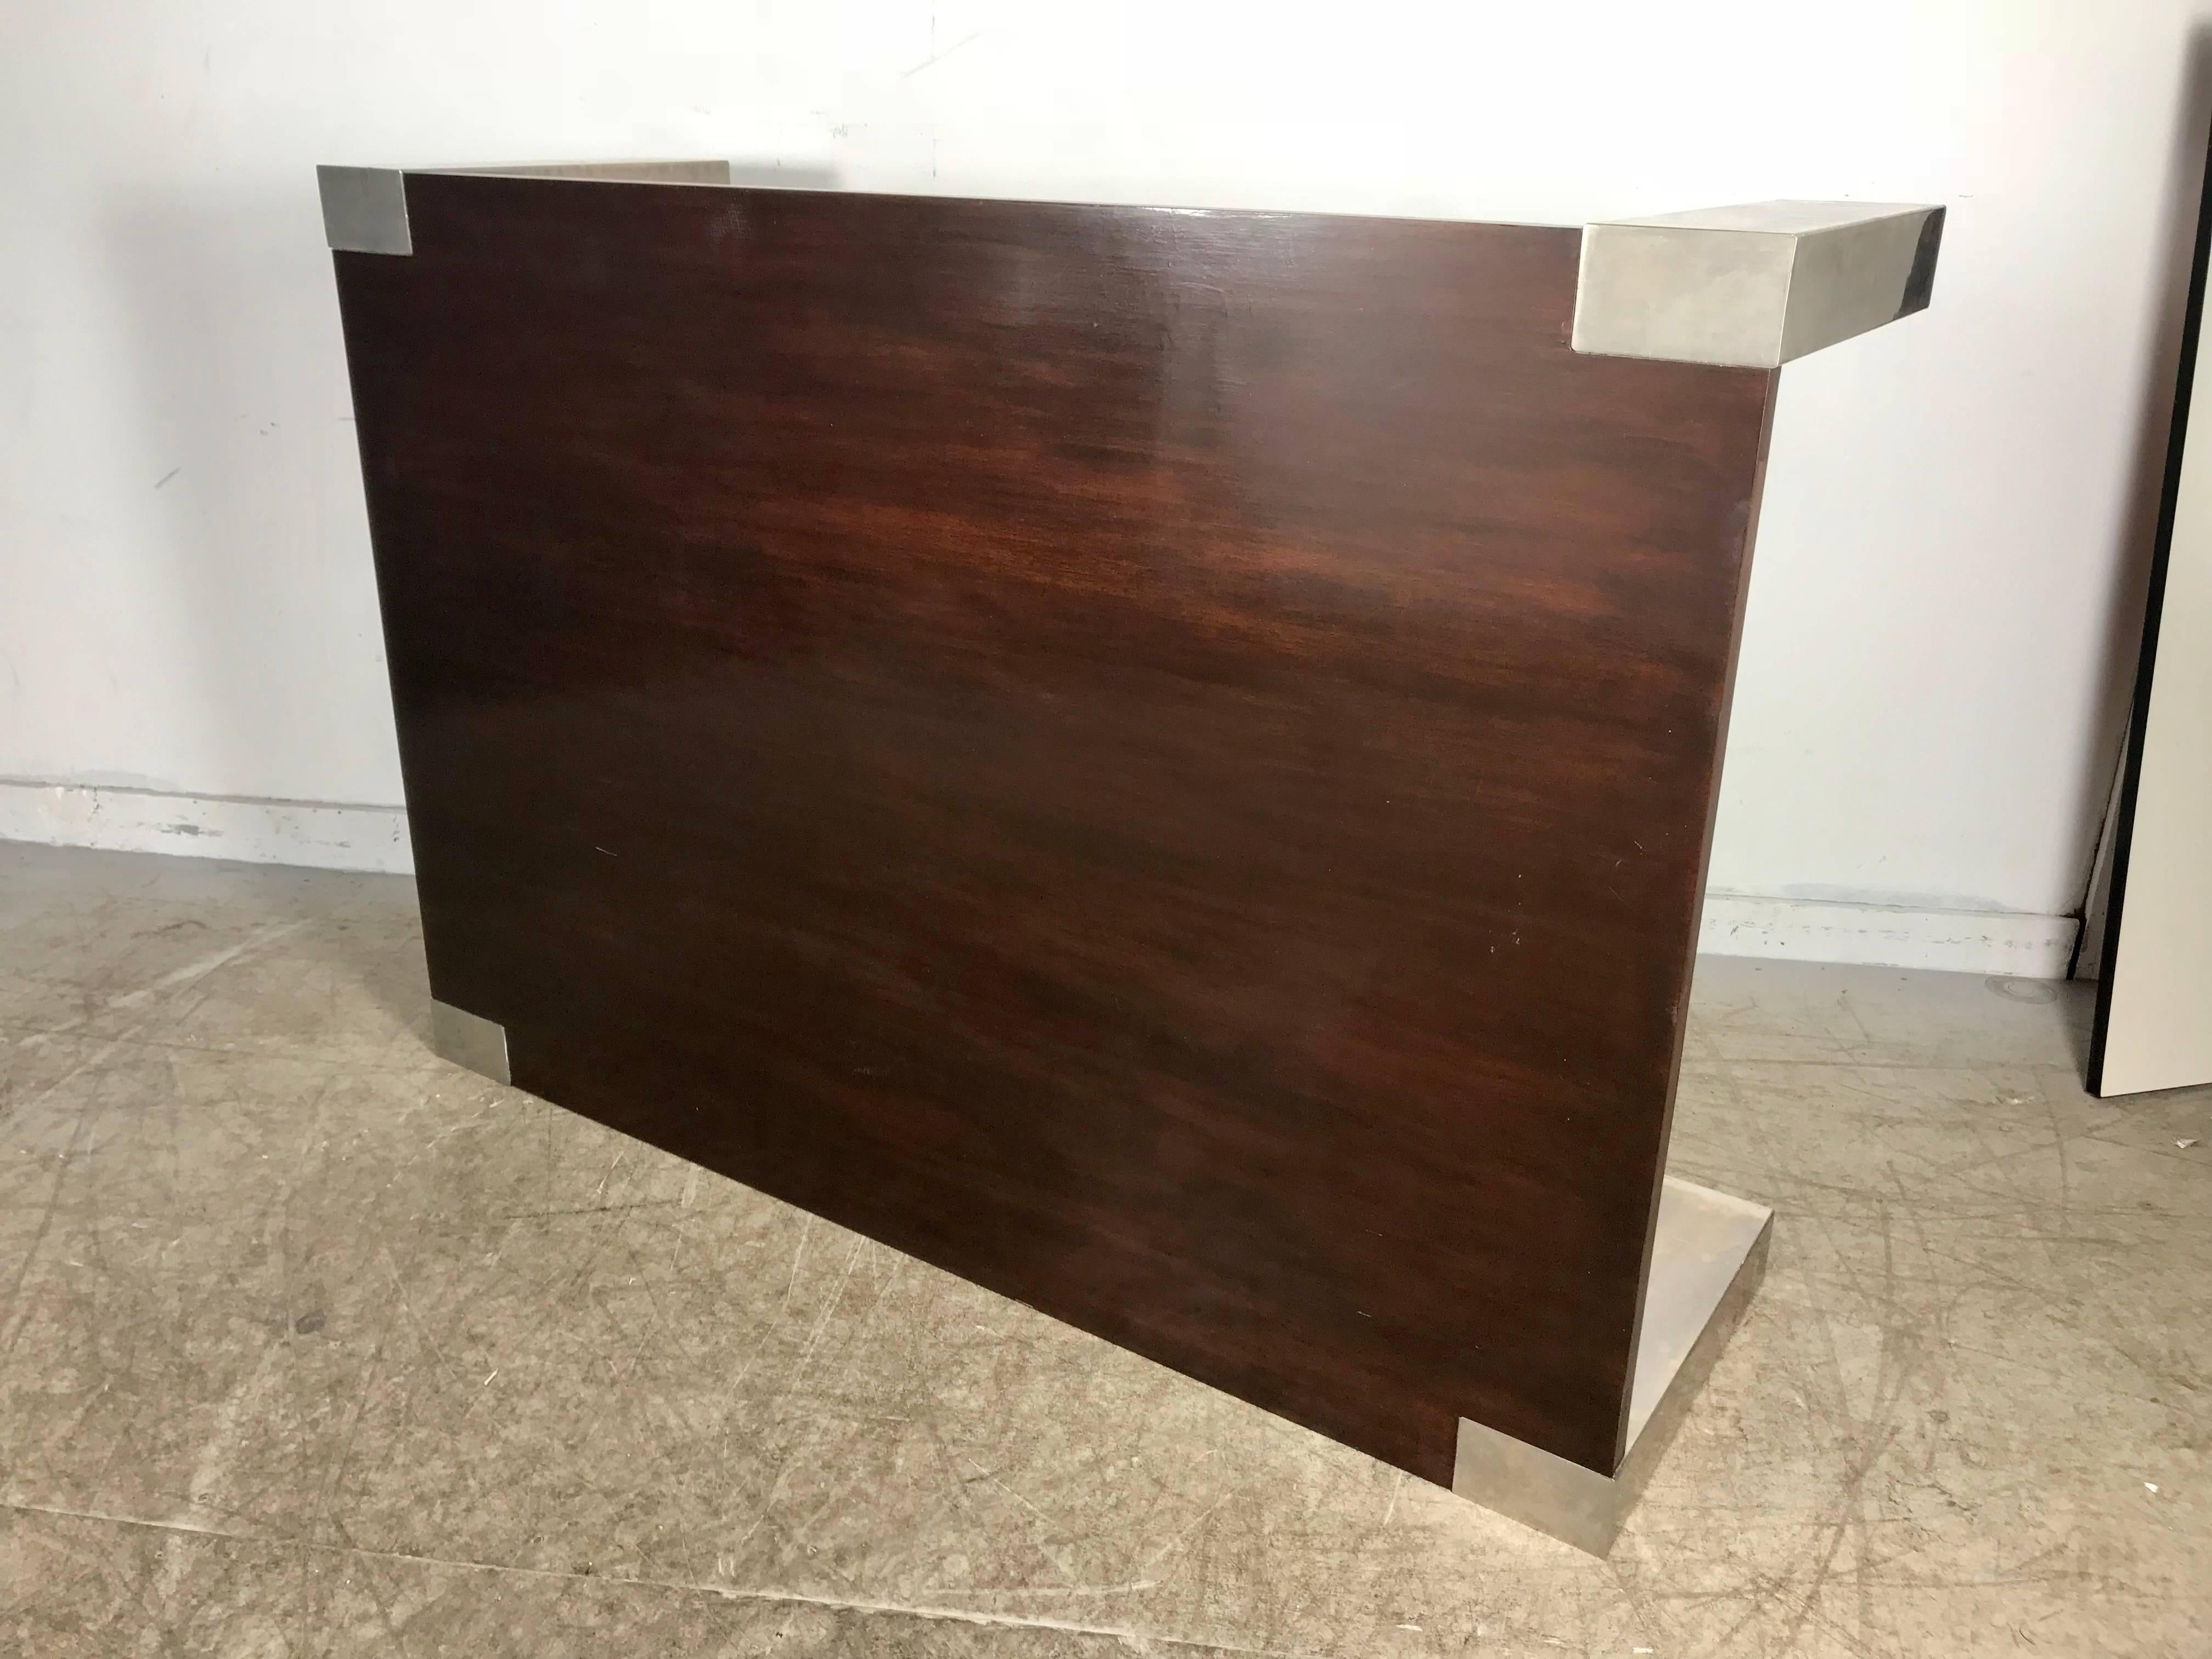 Monumental 1970s Stainless Steel and Wood Coffee Table For Sale 1